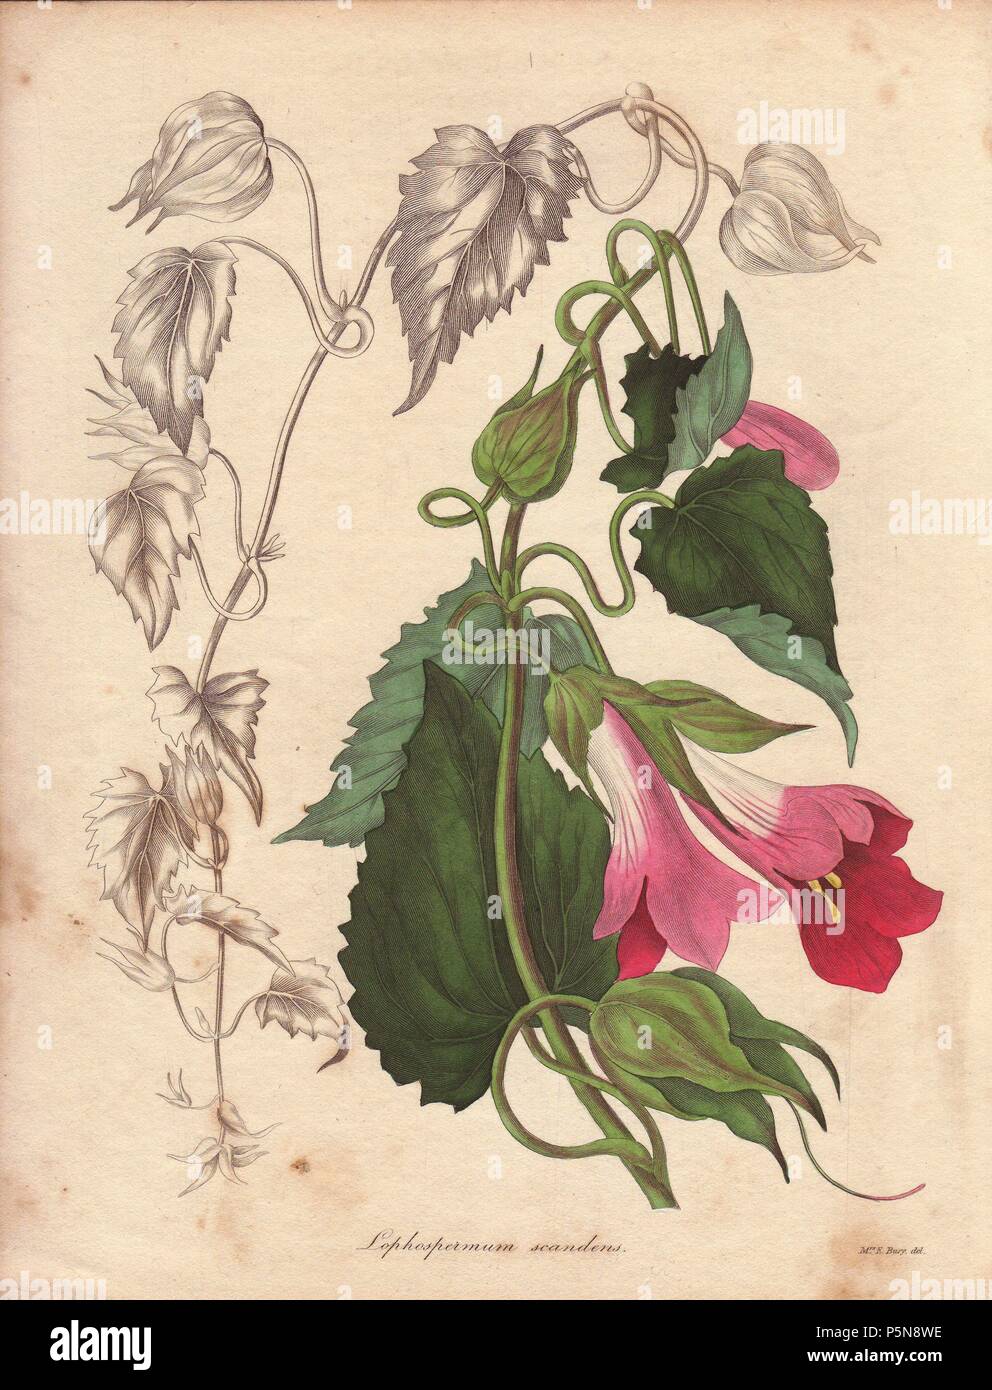 Lophospermum scandens. . Climbing lophospermum with pink and purplish flowers. . 'Mr. Bates found it growing very generally over bushes in Mexico. Our present plant first flowered in the collection of Charles Tayleure of Toxteth Park, who presented it to Liverpool Botanic Garden. Specimens were handed to Mrs. E. Bury of Everton, to whose kindness and talent we are indebted for the present delineation.'. . Illustration by Mrs. Priscilla Bury, with partly coloured plant and flowers, and uncoloured engraving of the stalk and leaves at left.. . Benjamin Maund's The Botanist was a five-volume serie Stock Photo